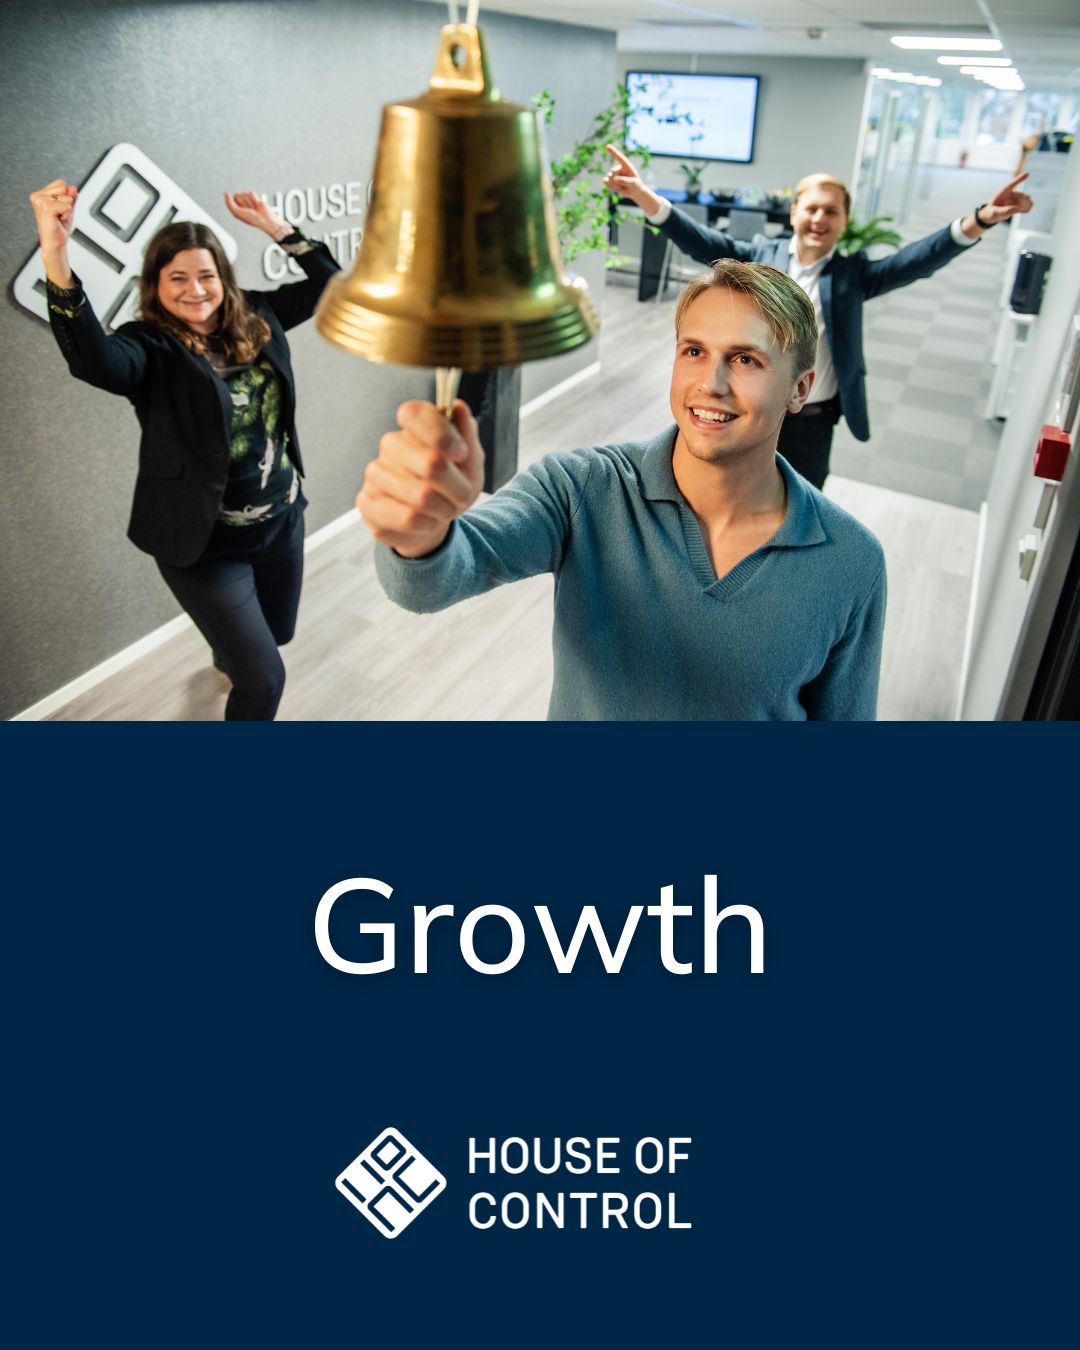 About House of Control - Growth